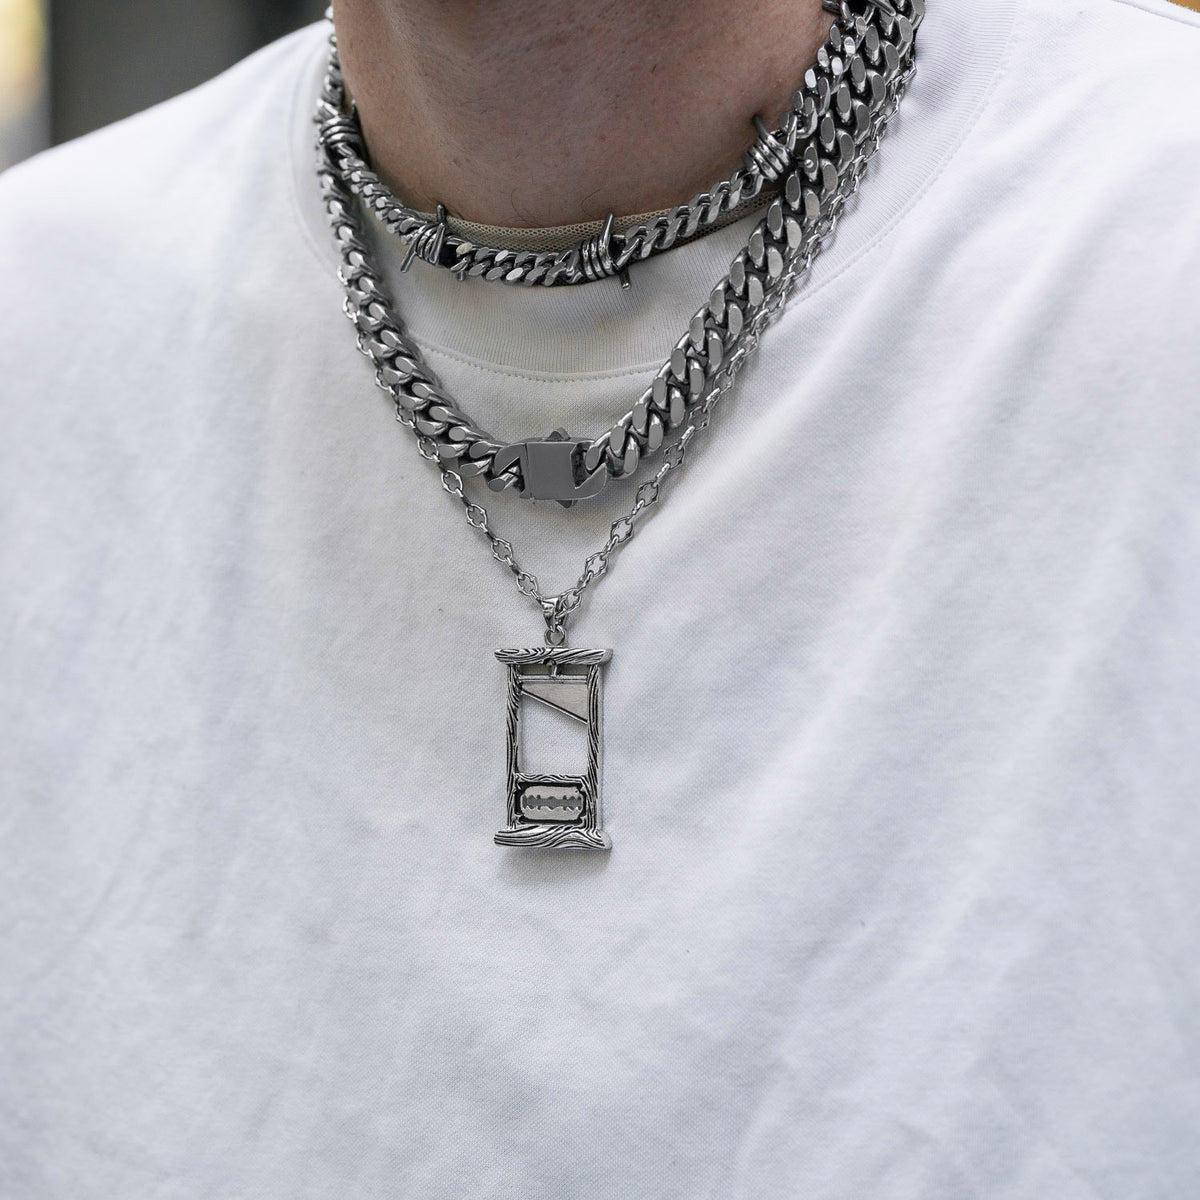 guillotine necklace pendant mens by statement